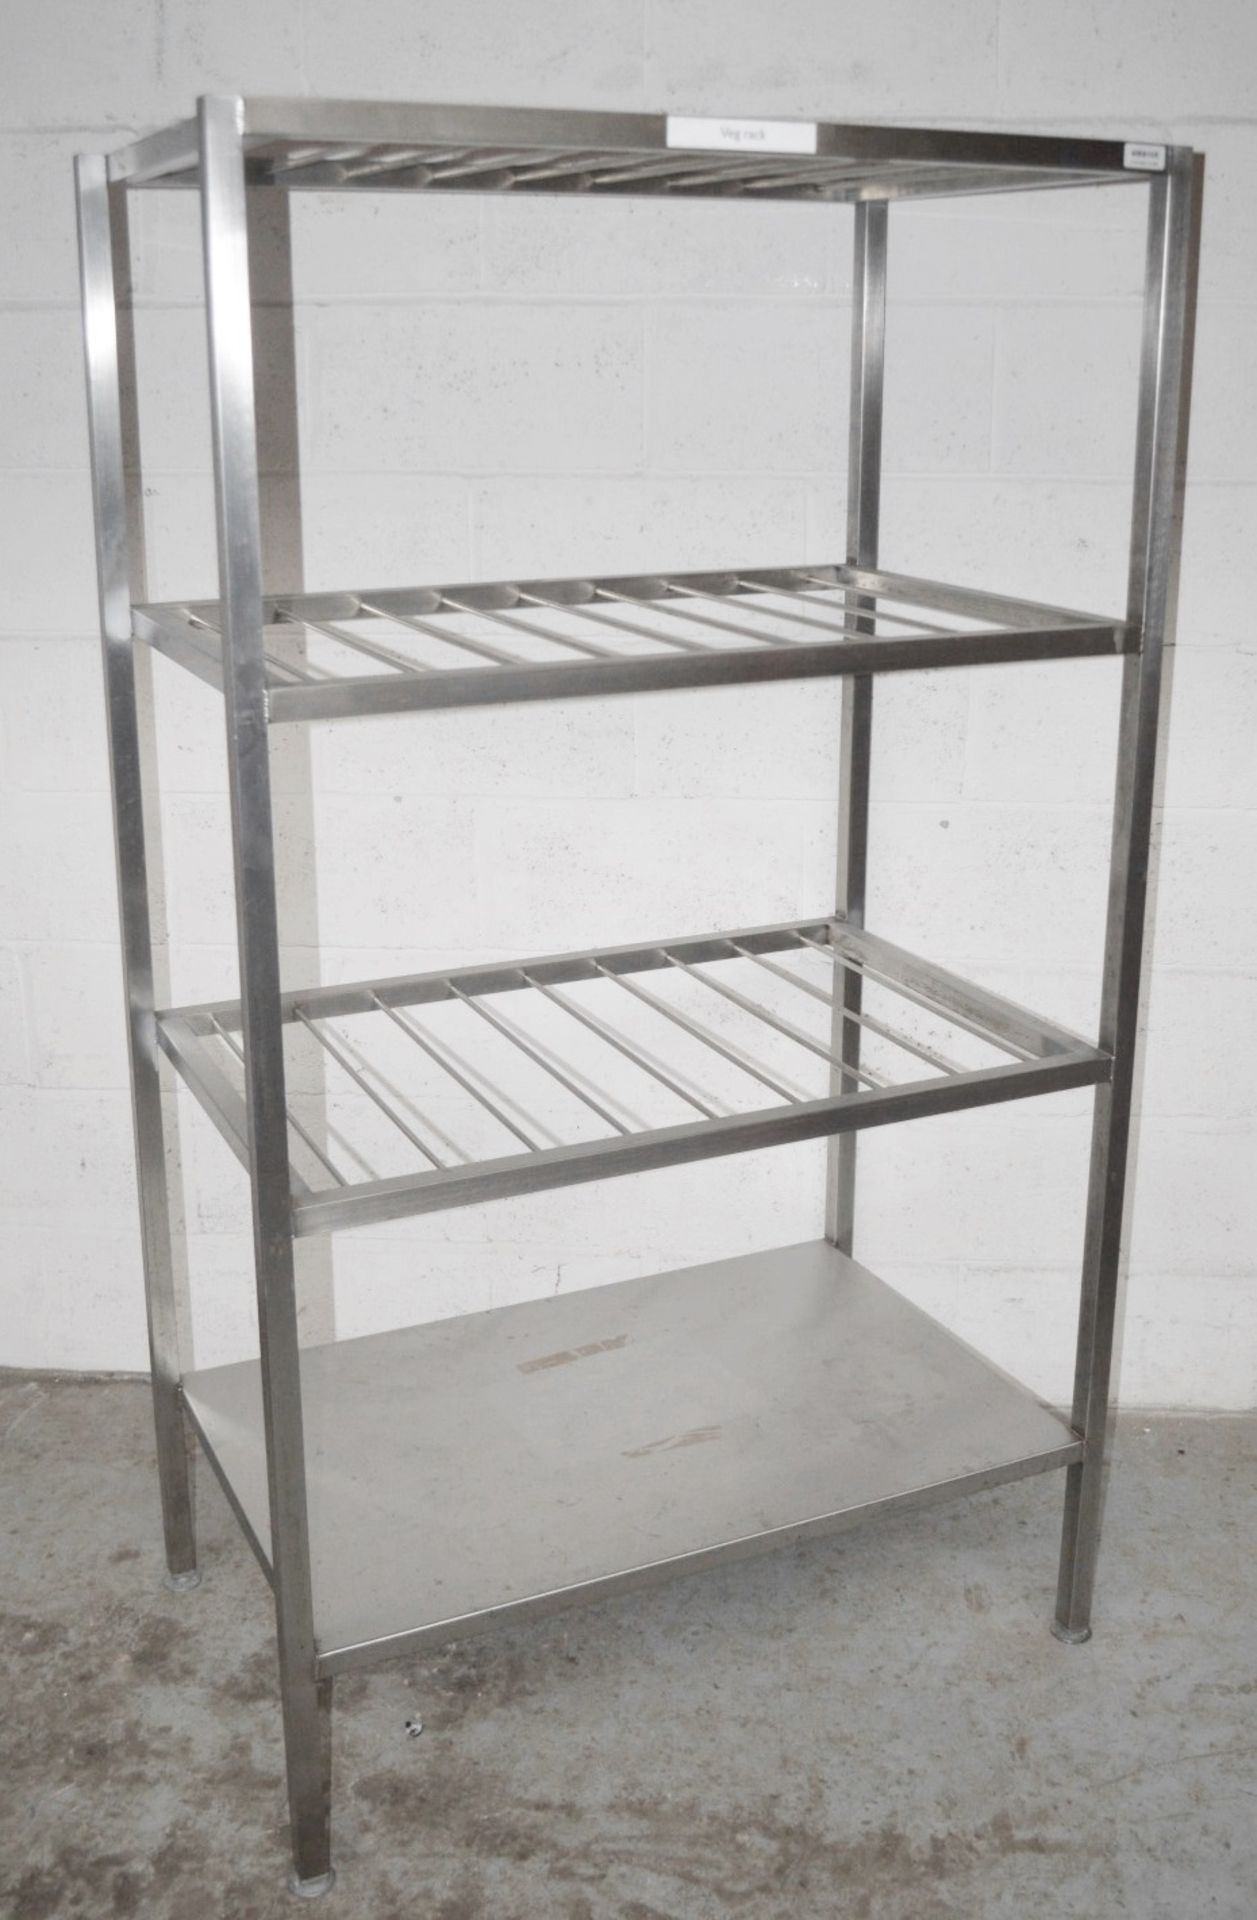 1 x Stainless Steel Commercial Kitchen Veg Rack - Dimensions: H174 x W100 x D60cm - Very Recently